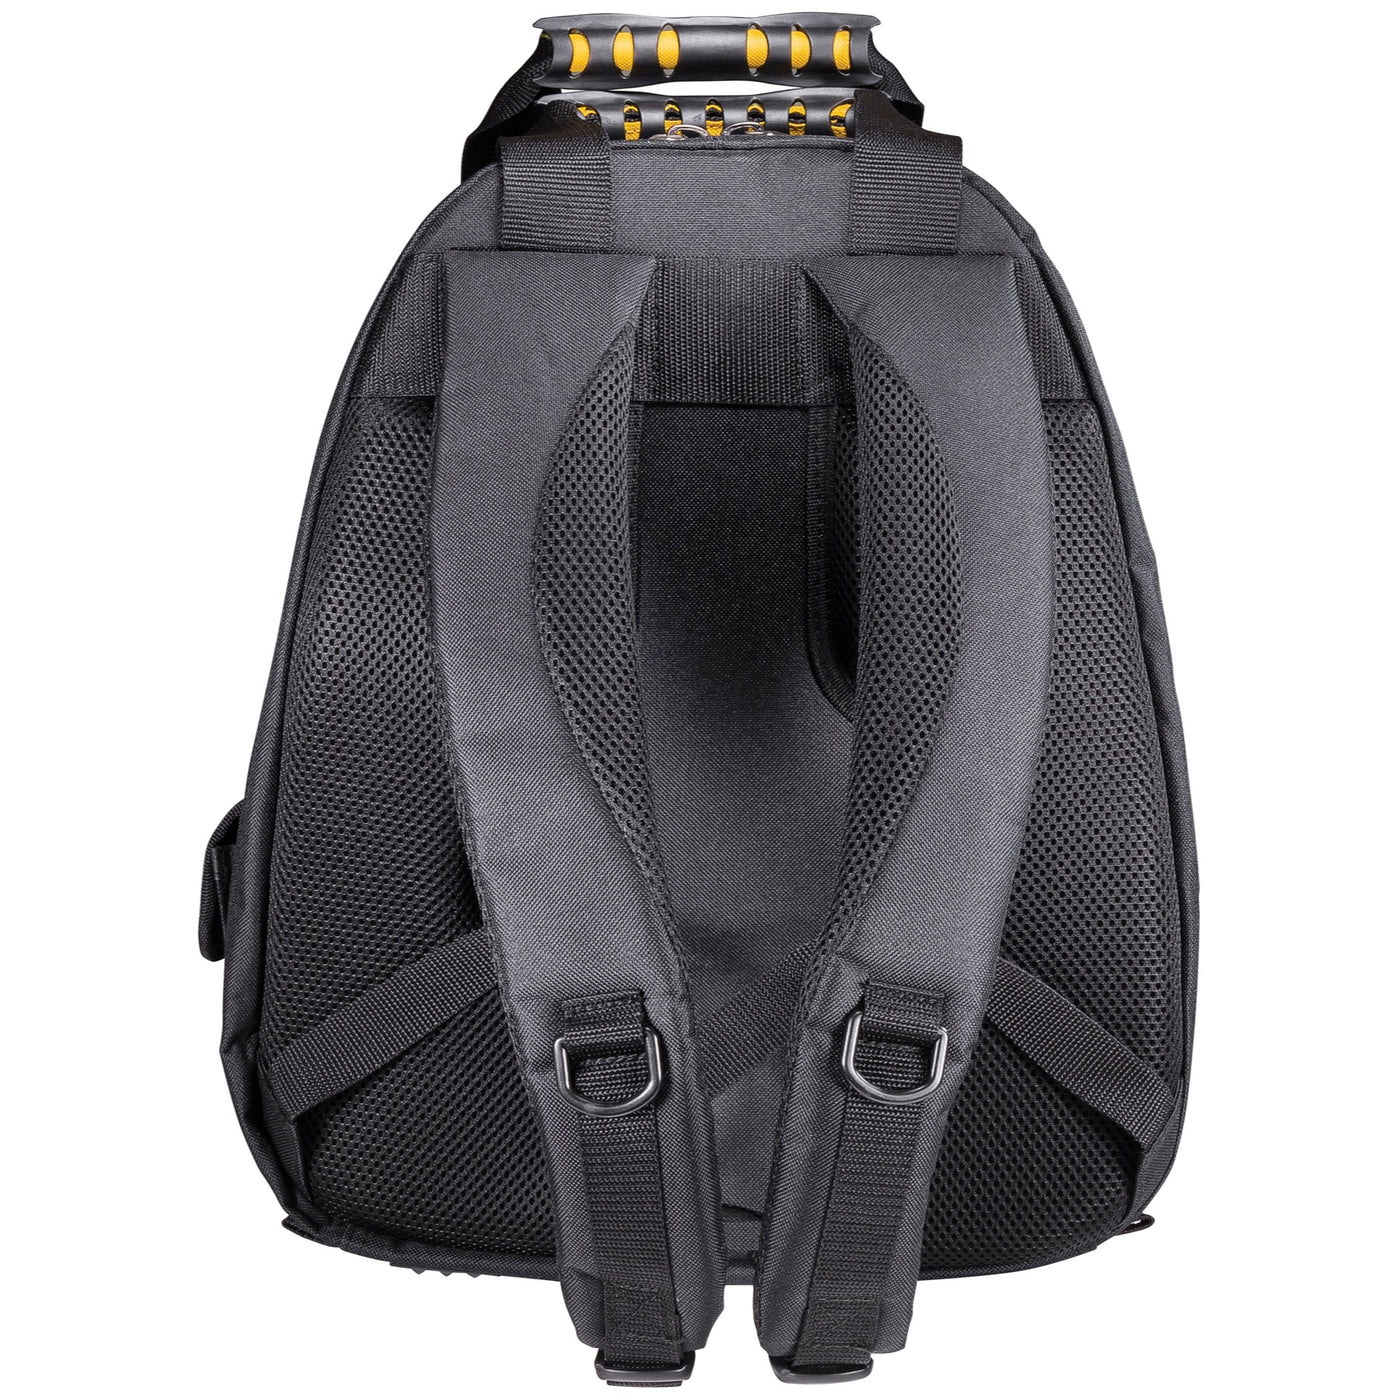 17 in. Tech Tool Backpack